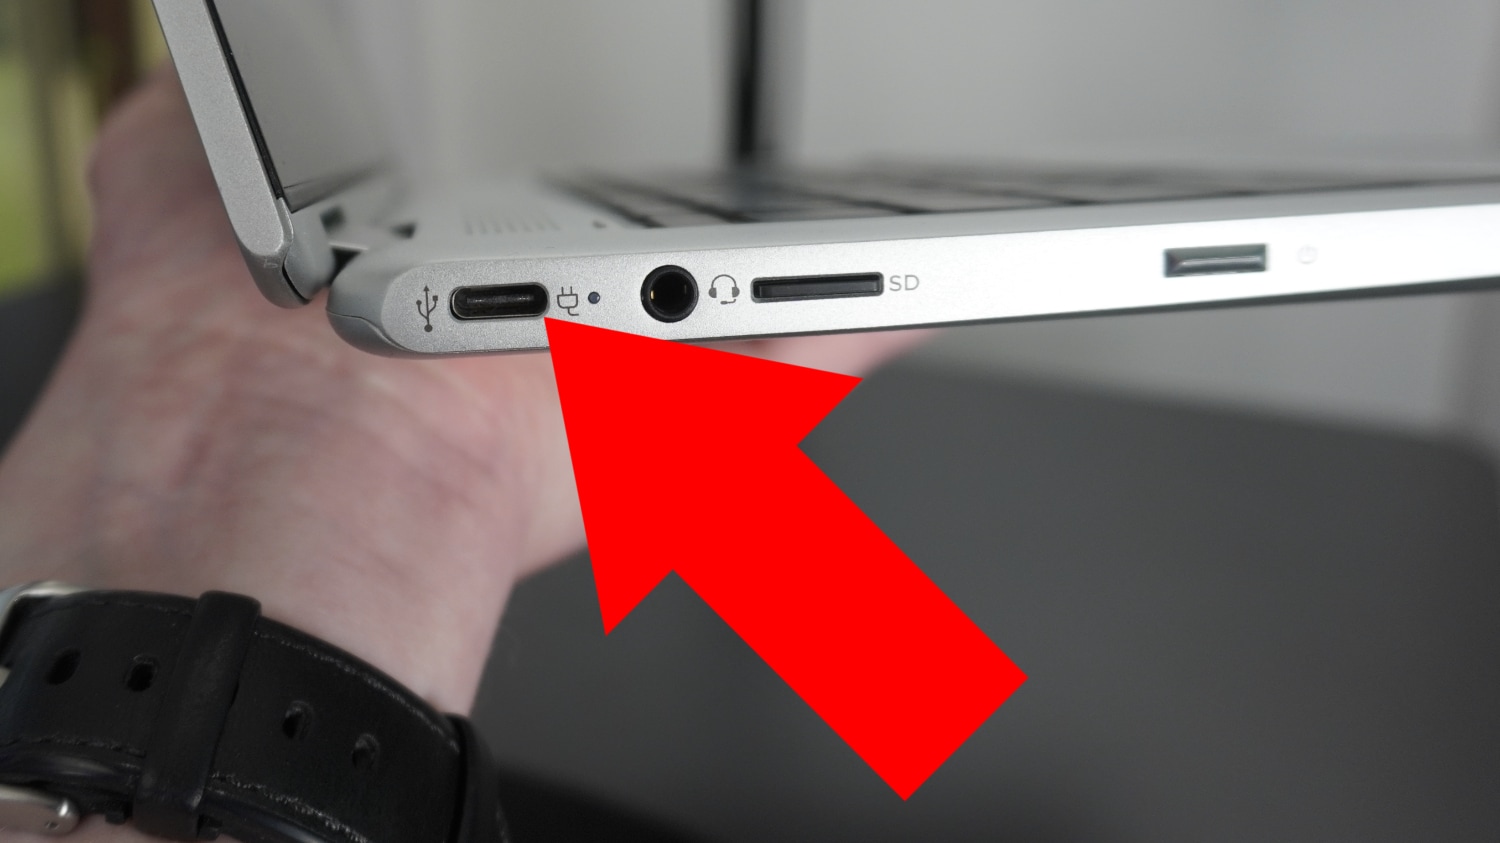 how to safely eject usb from chromebook